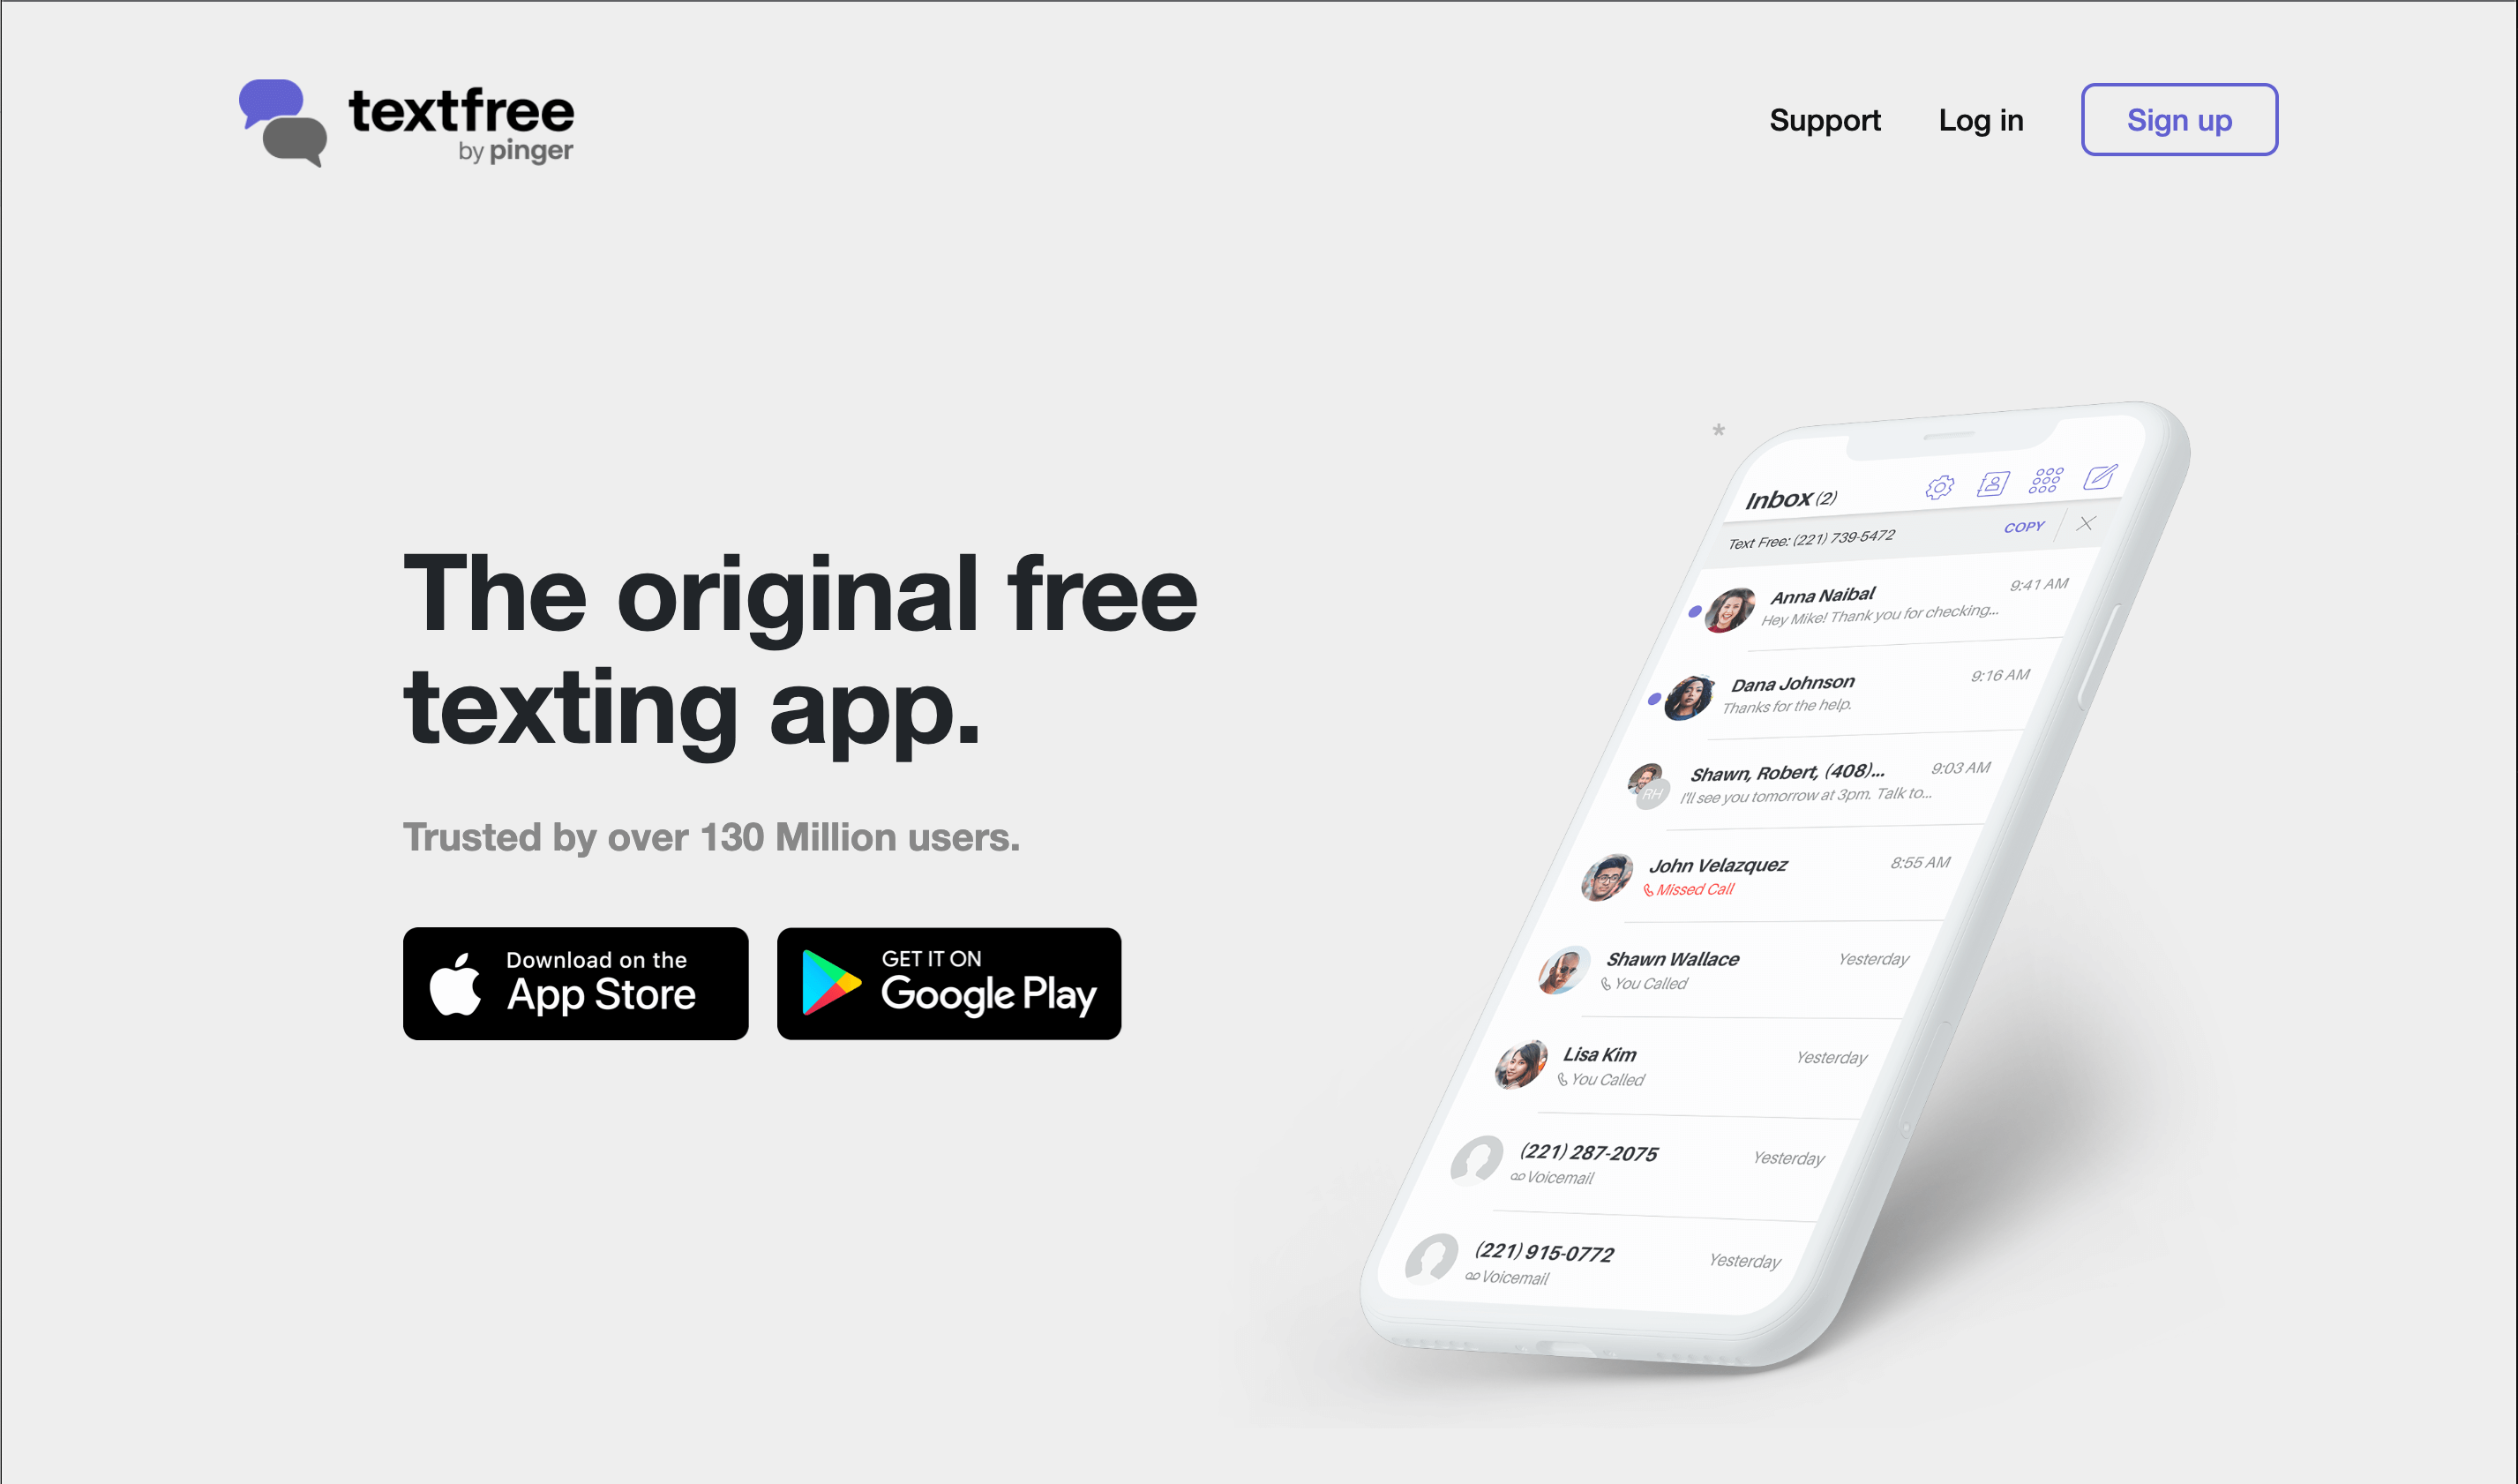 The Text Free home page